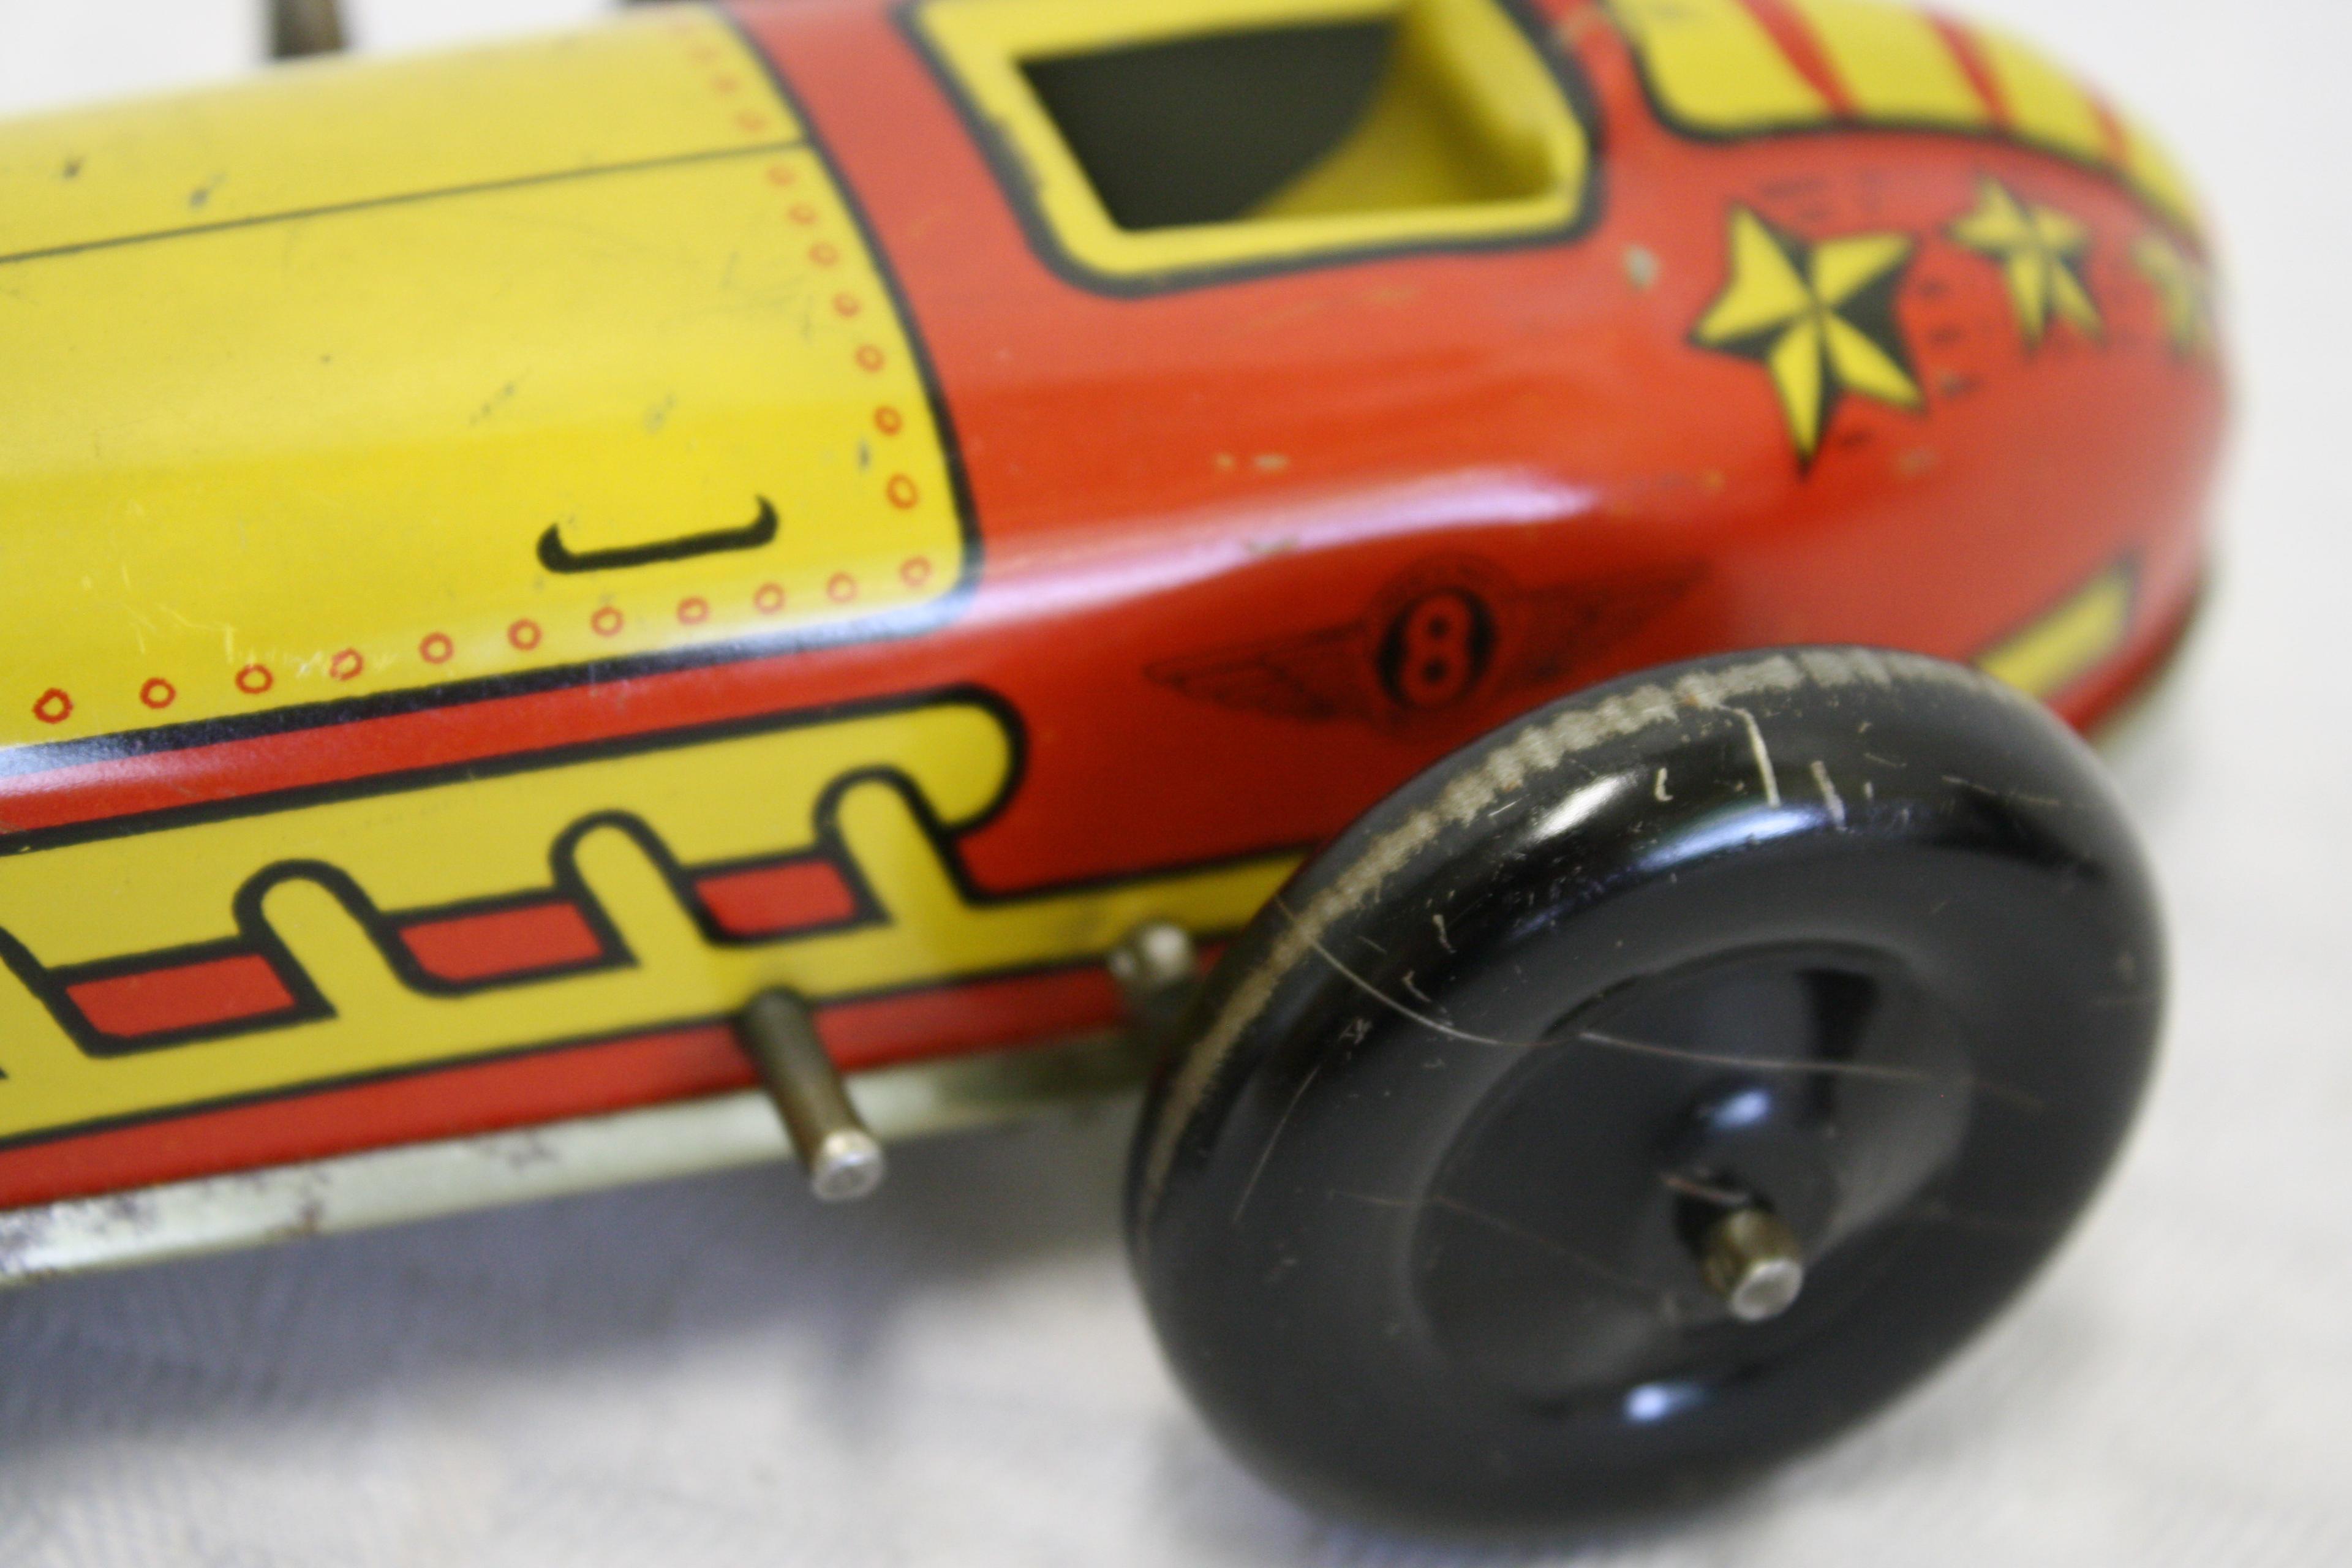 Lupor Metal Products No. 8 Tin Litho Open Wheel Racer